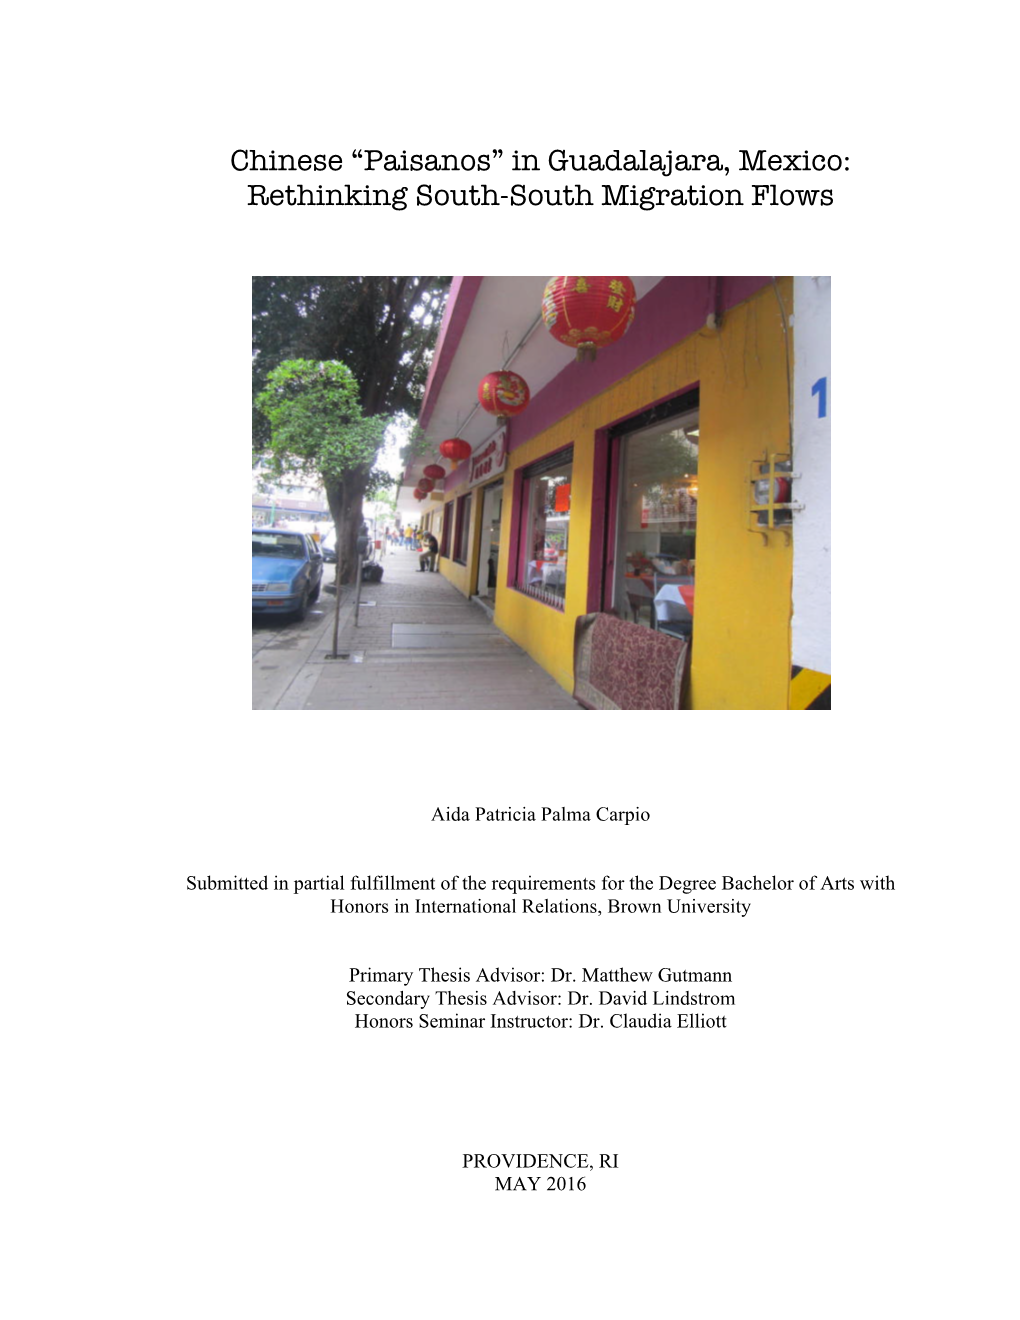 In Guadalajara, Mexico: Rethinking South-South Migration Flows